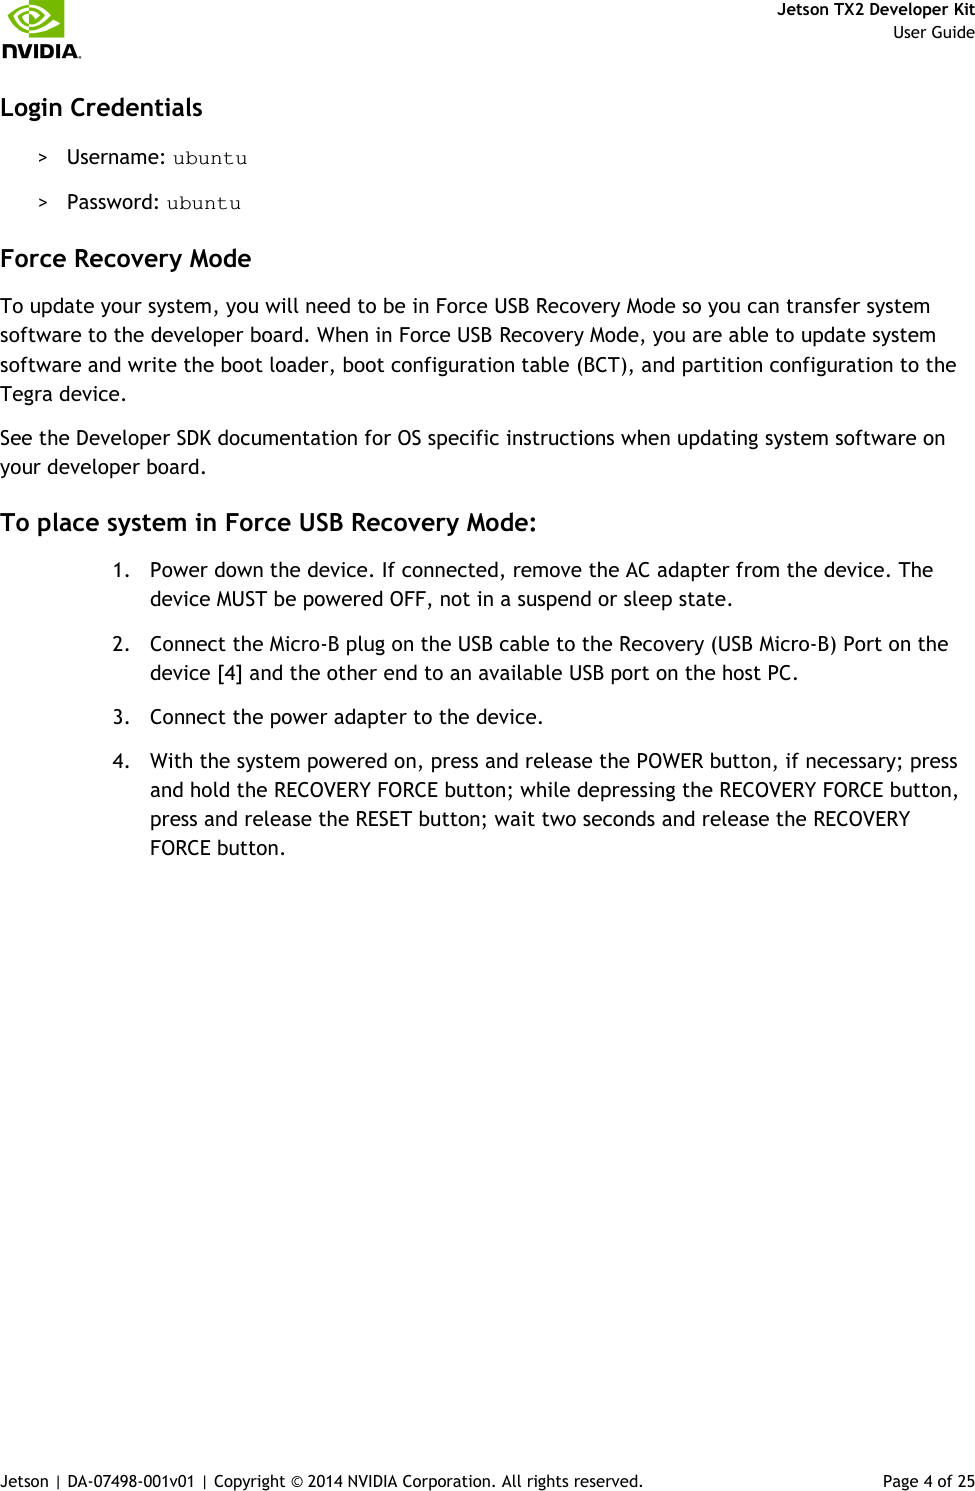     Jetson TX2 Developer Kit     User Guide Jetson | DA-07498-001v01 | Copyright © 2014 NVIDIA Corporation. All rights reserved.  Page 4 of 25 Login Credentials &gt; Username: ubuntu &gt; Password: ubuntu Force Recovery Mode To update your system, you will need to be in Force USB Recovery Mode so you can transfer system software to the developer board. When in Force USB Recovery Mode, you are able to update system software and write the boot loader, boot configuration table (BCT), and partition configuration to the Tegra device. See the Developer SDK documentation for OS specific instructions when updating system software on your developer board. To place system in Force USB Recovery Mode: 1. Power down the device. If connected, remove the AC adapter from the device. The device MUST be powered OFF, not in a suspend or sleep state. 2. Connect the Micro-B plug on the USB cable to the Recovery (USB Micro-B) Port on the device [4] and the other end to an available USB port on the host PC. 3. Connect the power adapter to the device. 4. With the system powered on, press and release the POWER button, if necessary; press and hold the RECOVERY FORCE button; while depressing the RECOVERY FORCE button, press and release the RESET button; wait two seconds and release the RECOVERY FORCE button. 